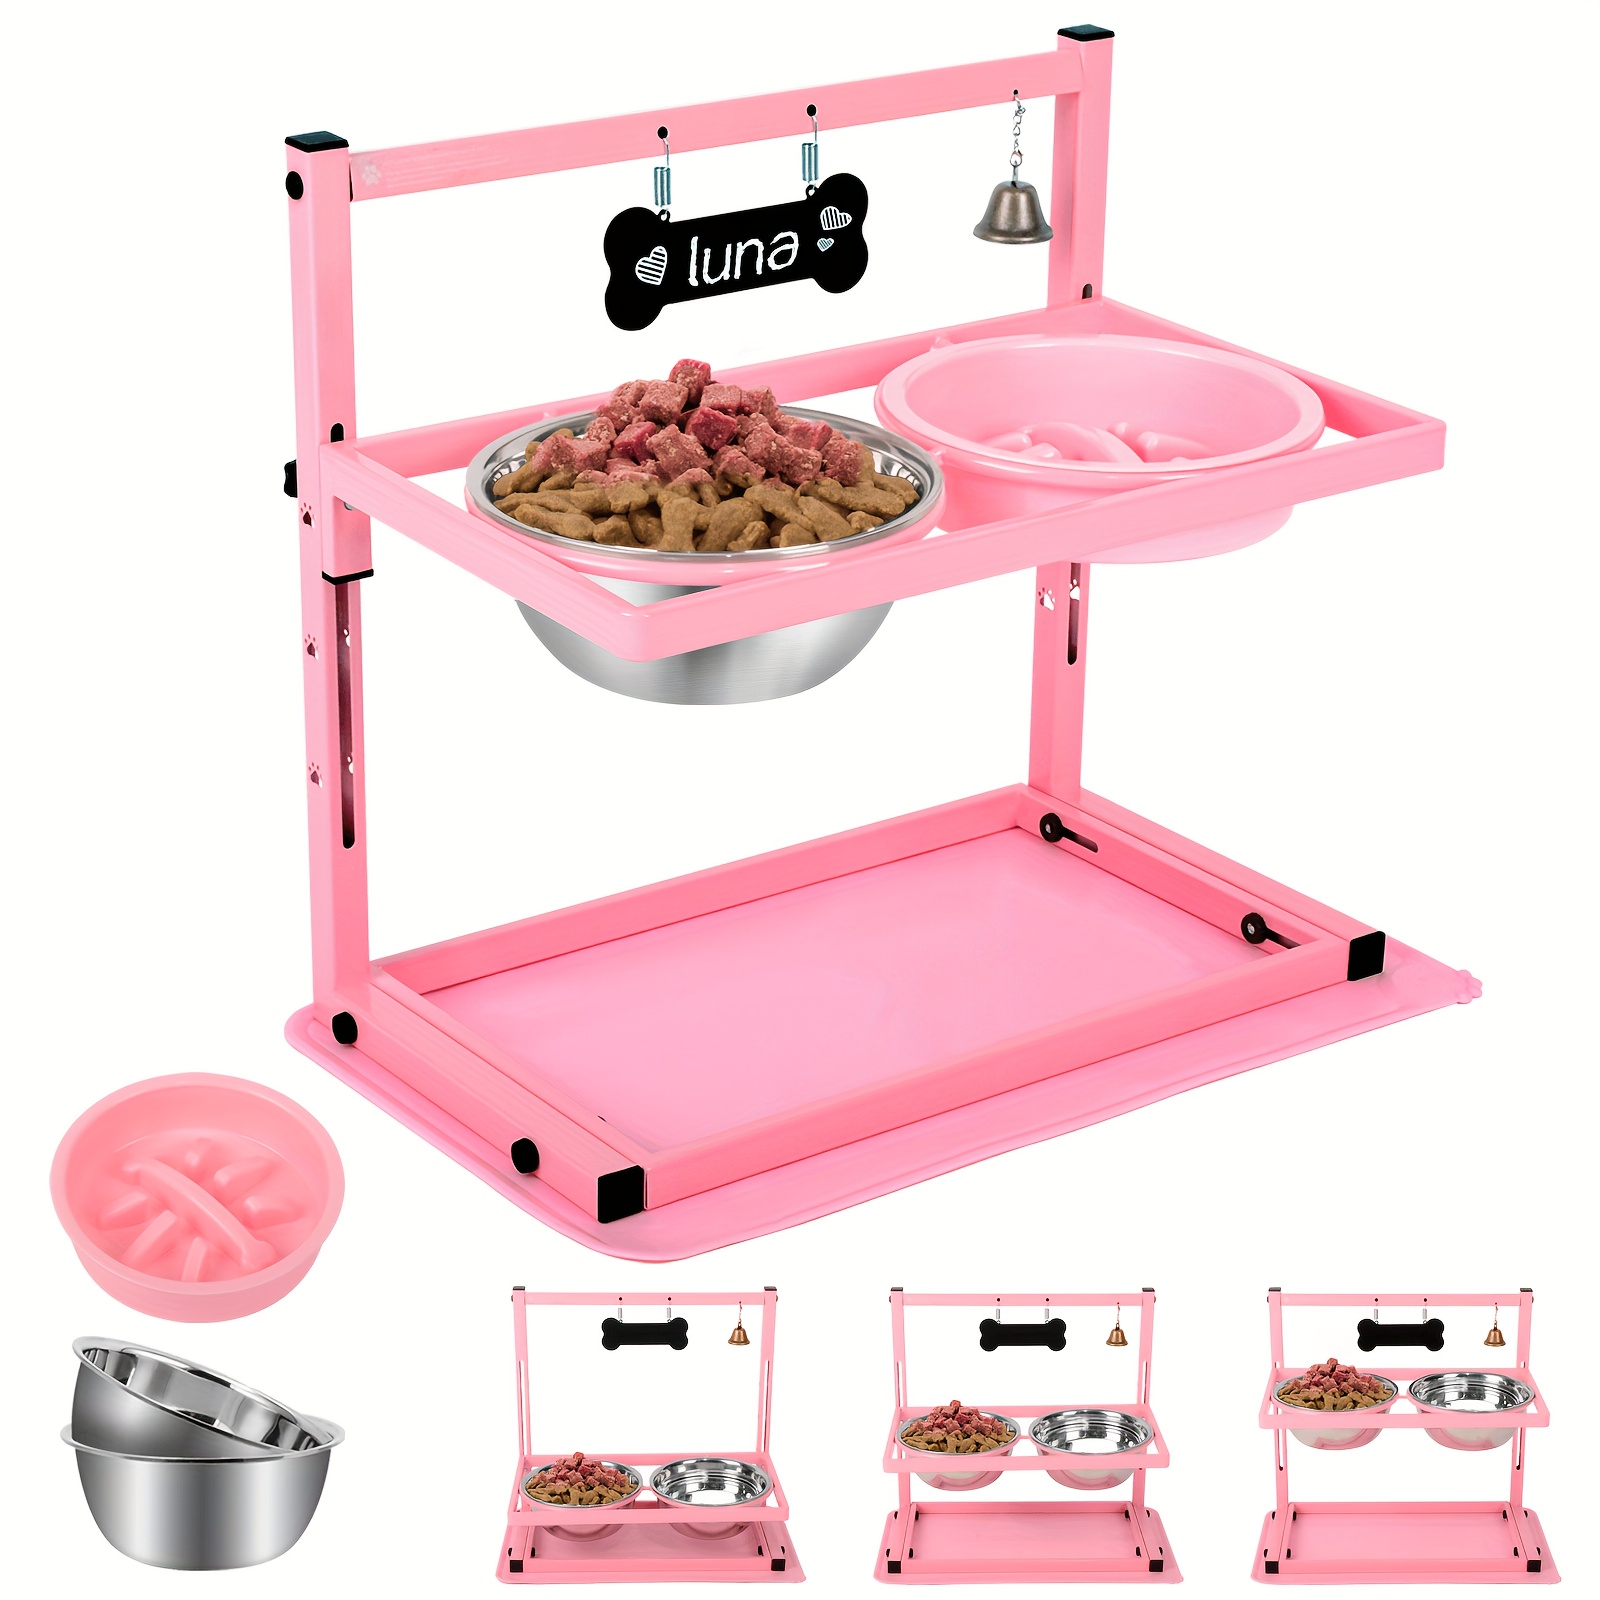 

Pink Adjustable Raised Dog Bowl Stand With 2 1700 Ml Stainless Steel Food Bowls, A Slow Dog Feeder And A Silicone Mat, Metal Dog Feeder, Elevated Dog Bowls For Large Medium And Small Dogs